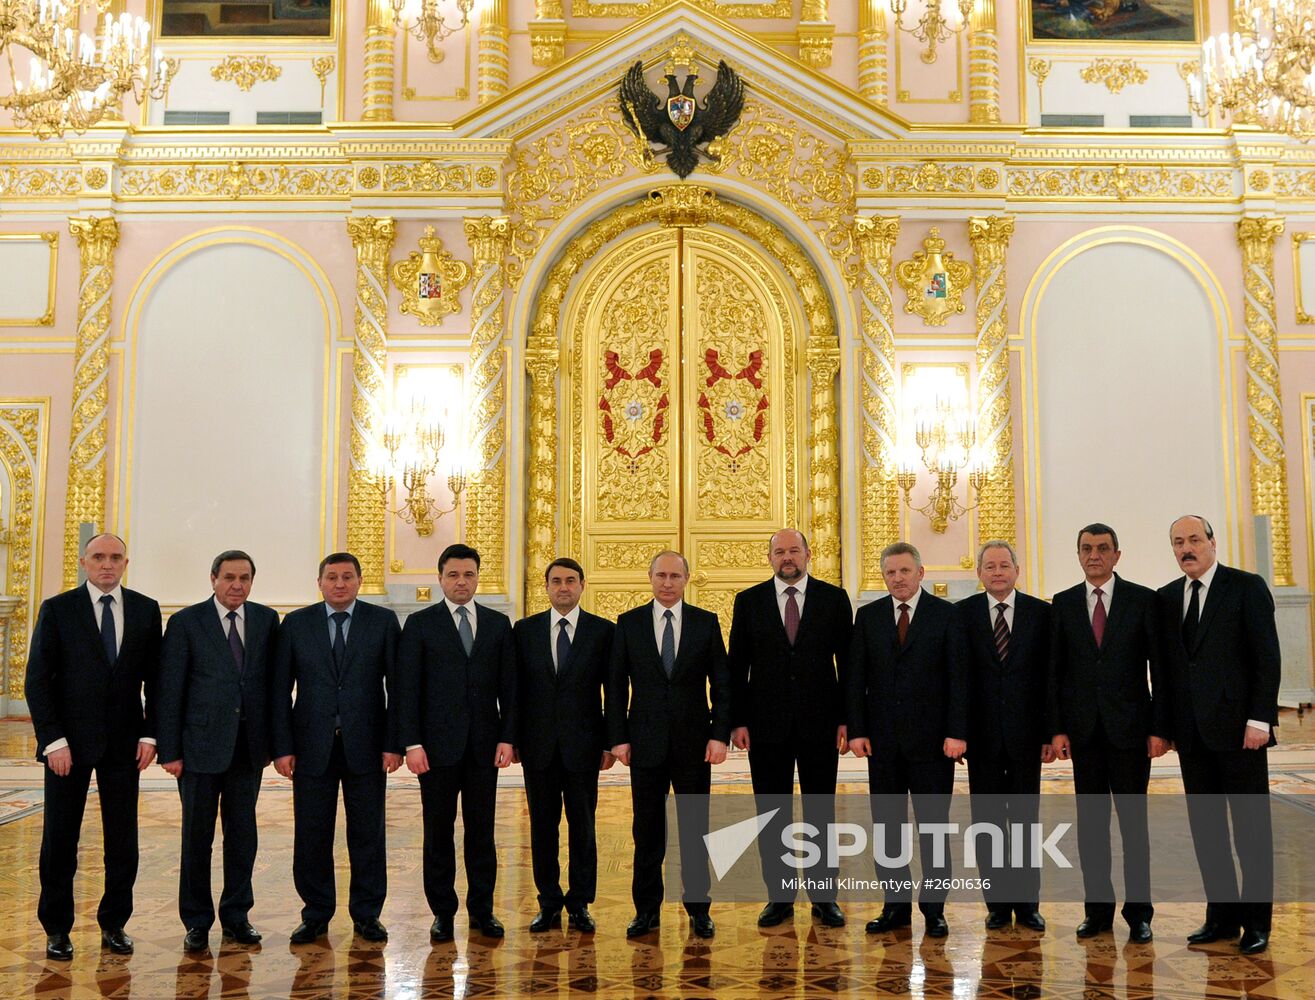 President Vladimir Putin conducts Russian State Council meeting